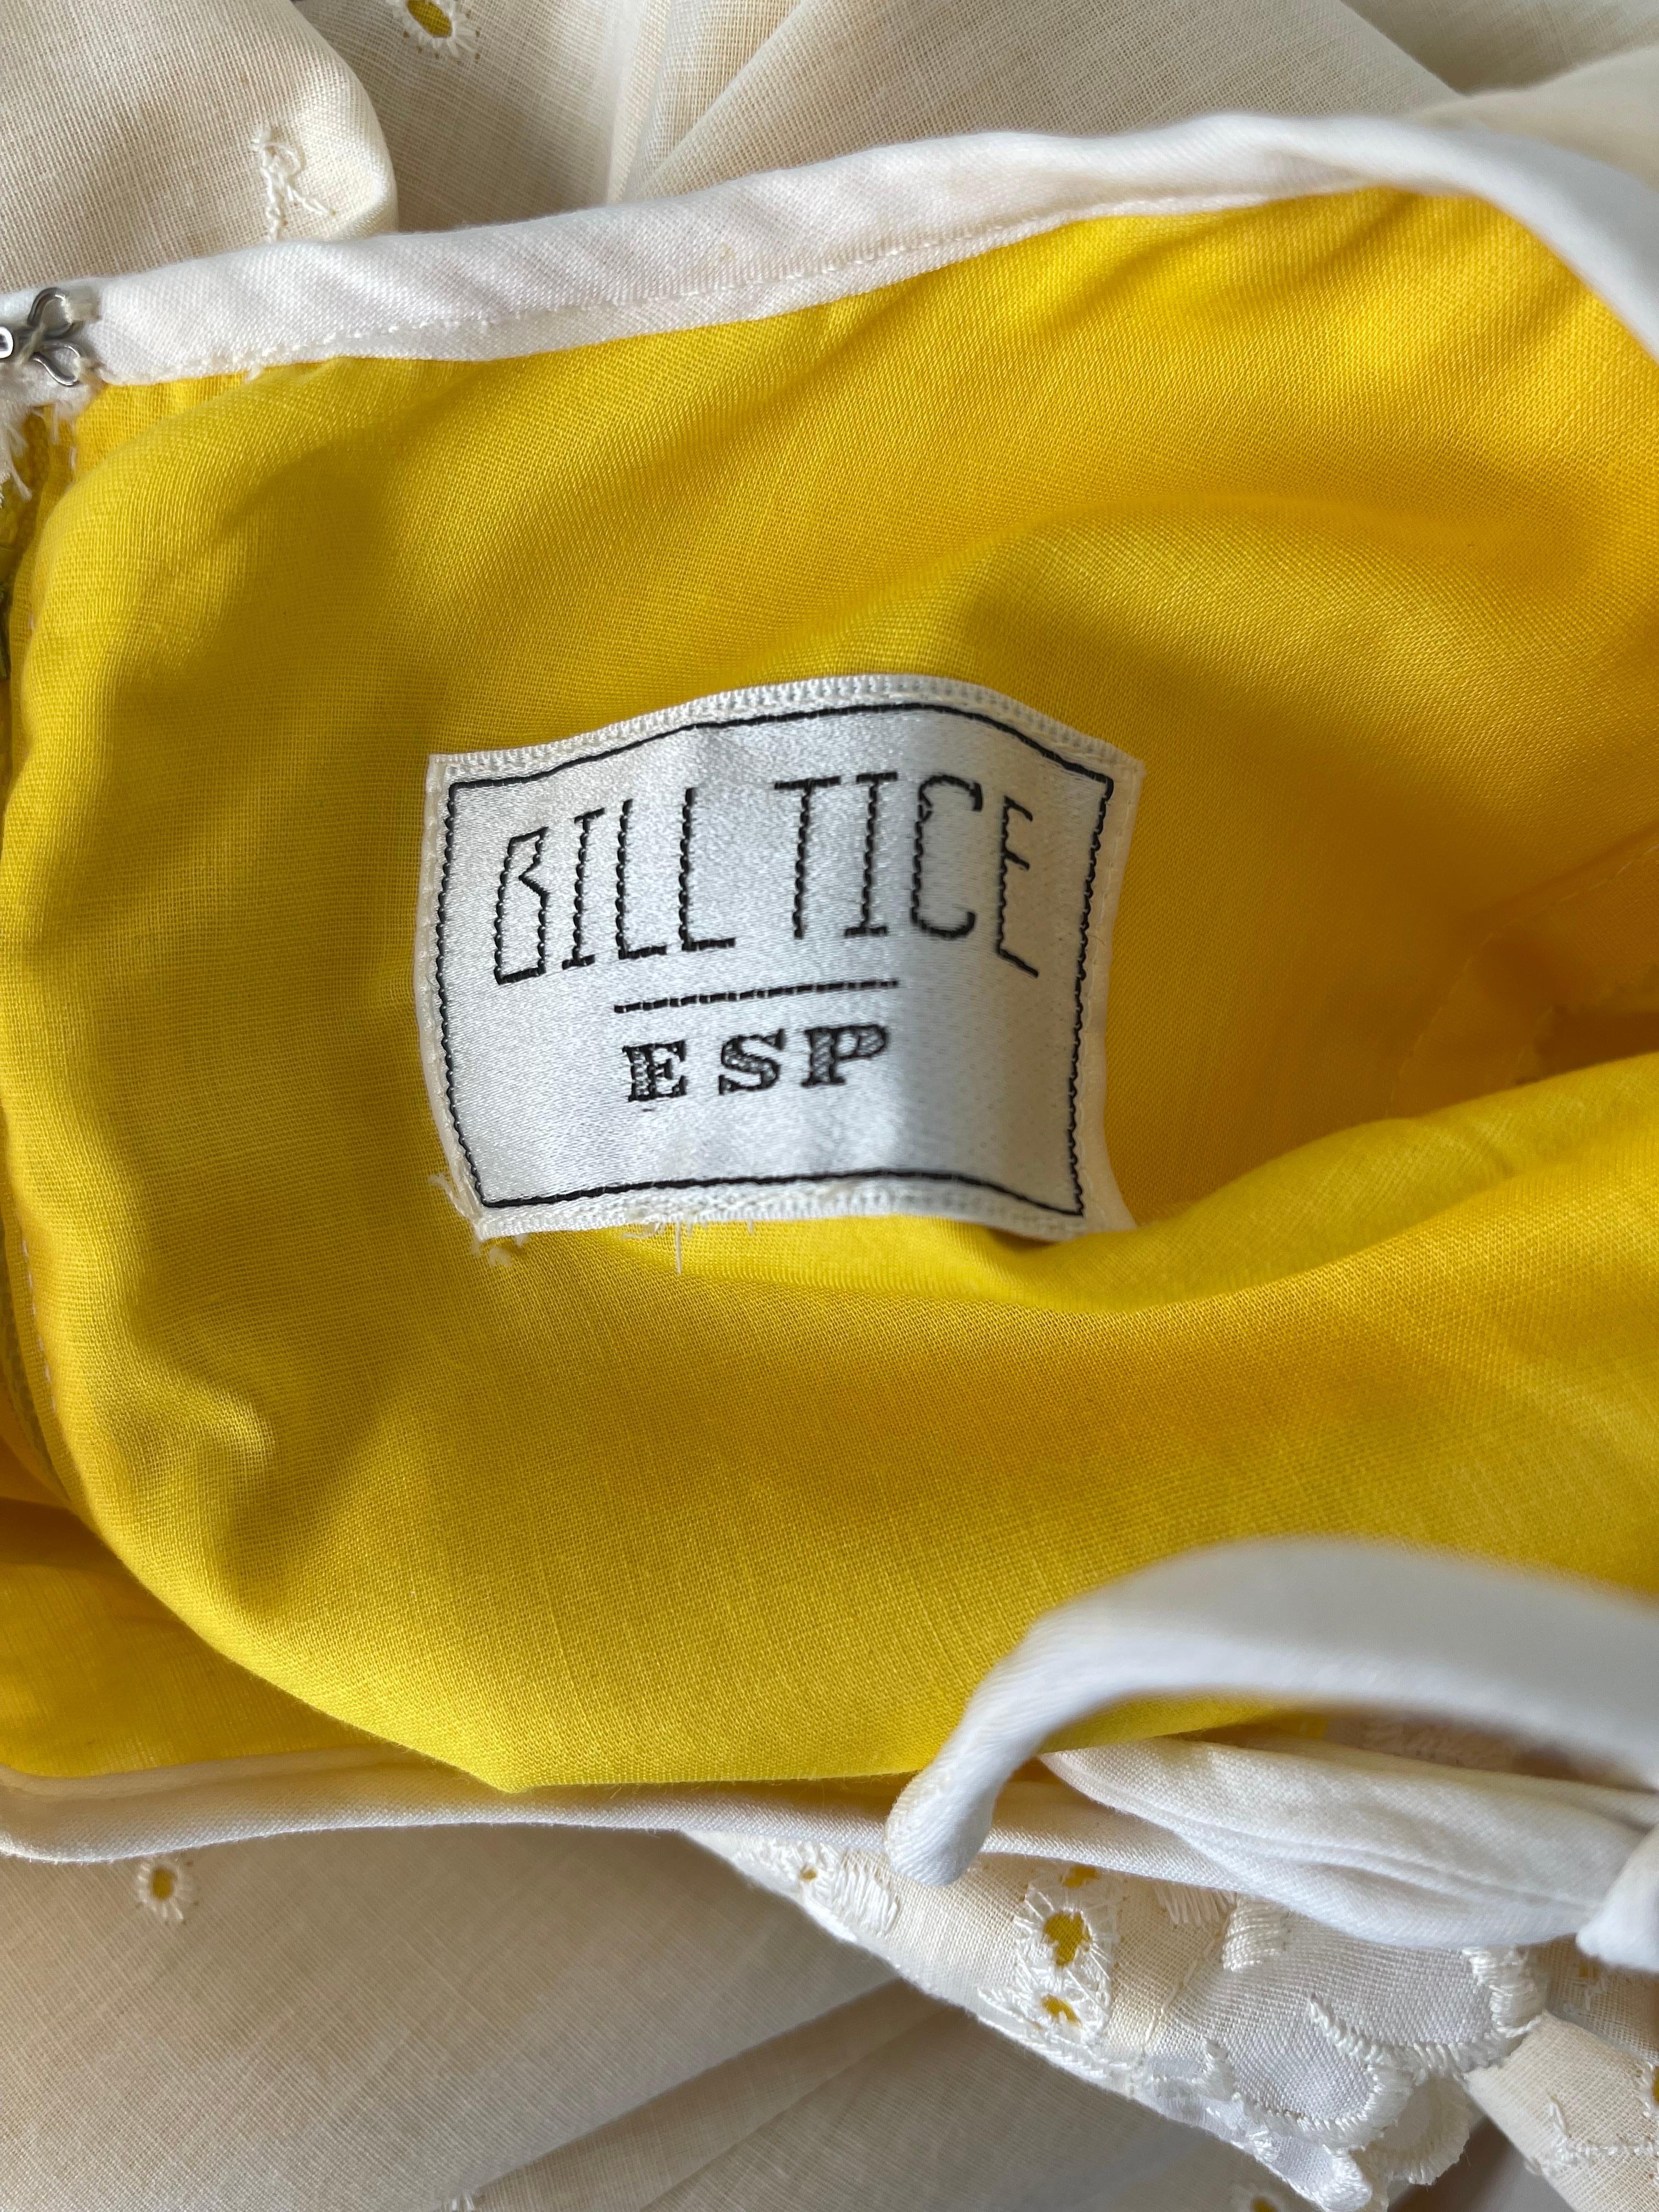 1970s BILL TICE pale yellow + white long sleeve cotton maxi dress ! Features all over eyelets with ties at center neck. POCKETS at each side of the hips. Hidden zipper up the back with hook-ad-eye closure. Yellow ribbon tie belt. Can easily be worn